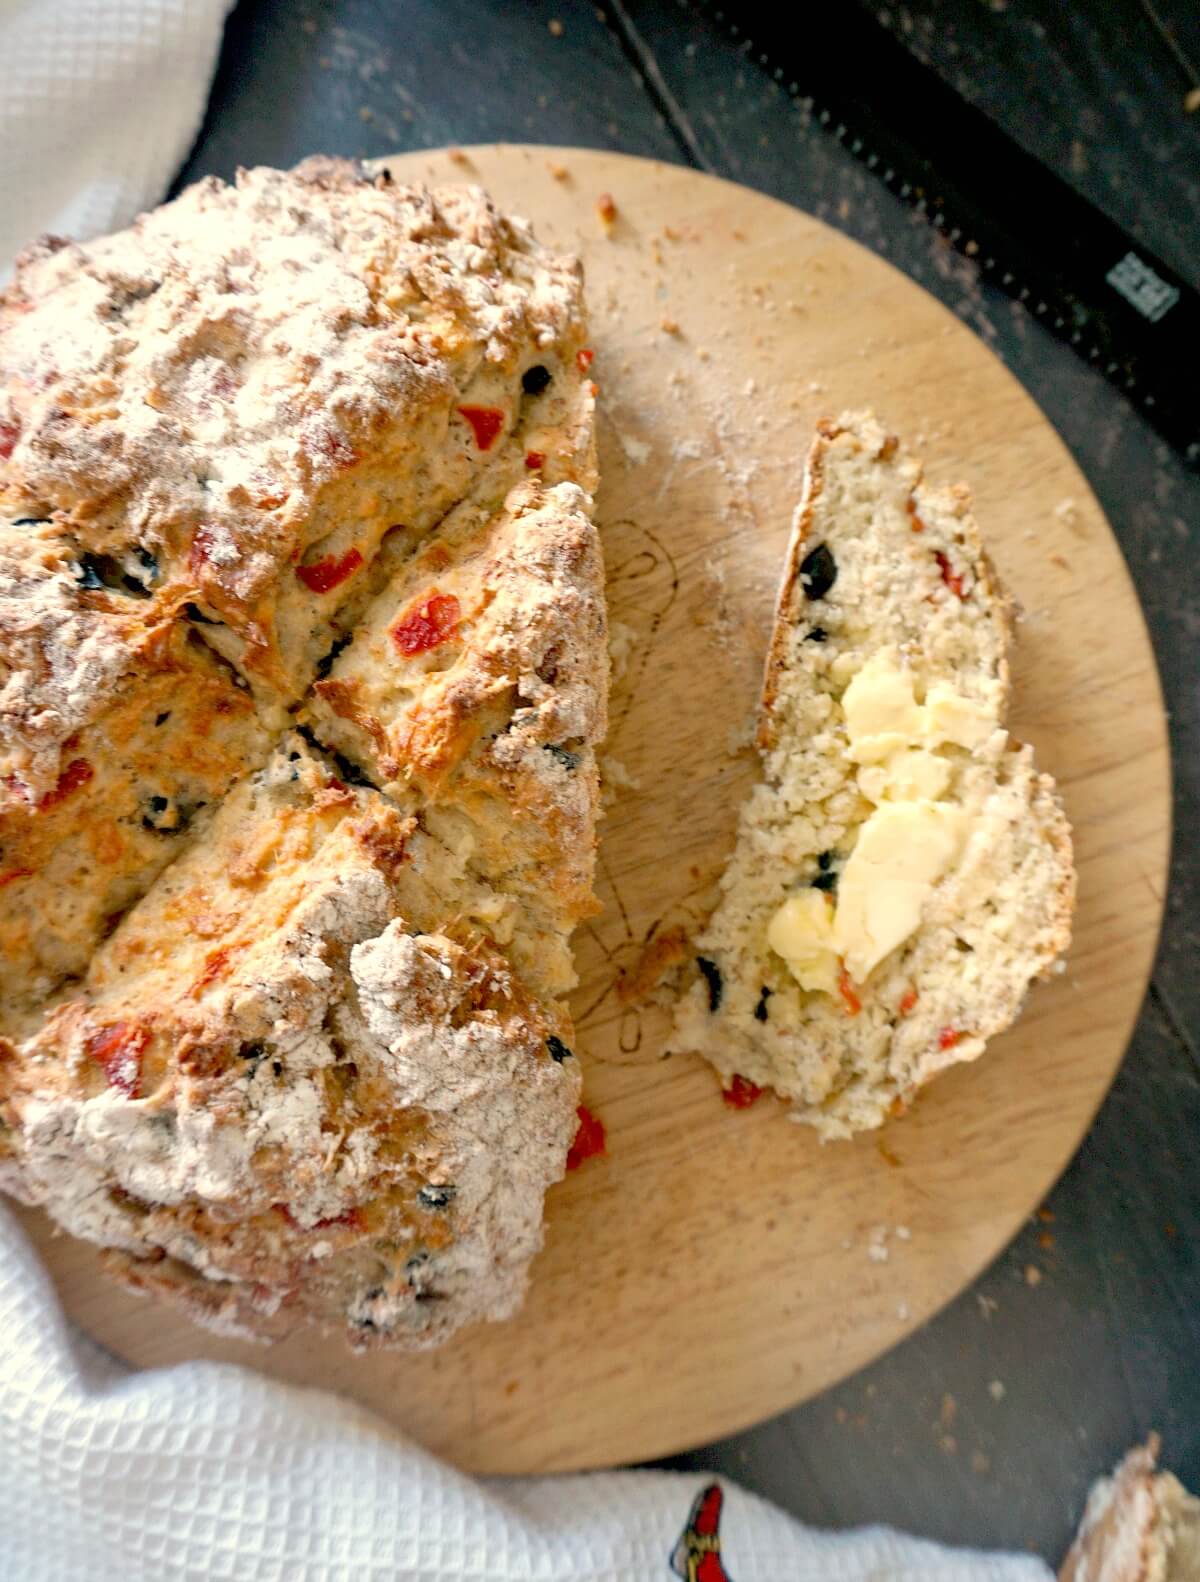 Overhead shoot of a wooden board with a soda bread and a slice of bread spread with butter